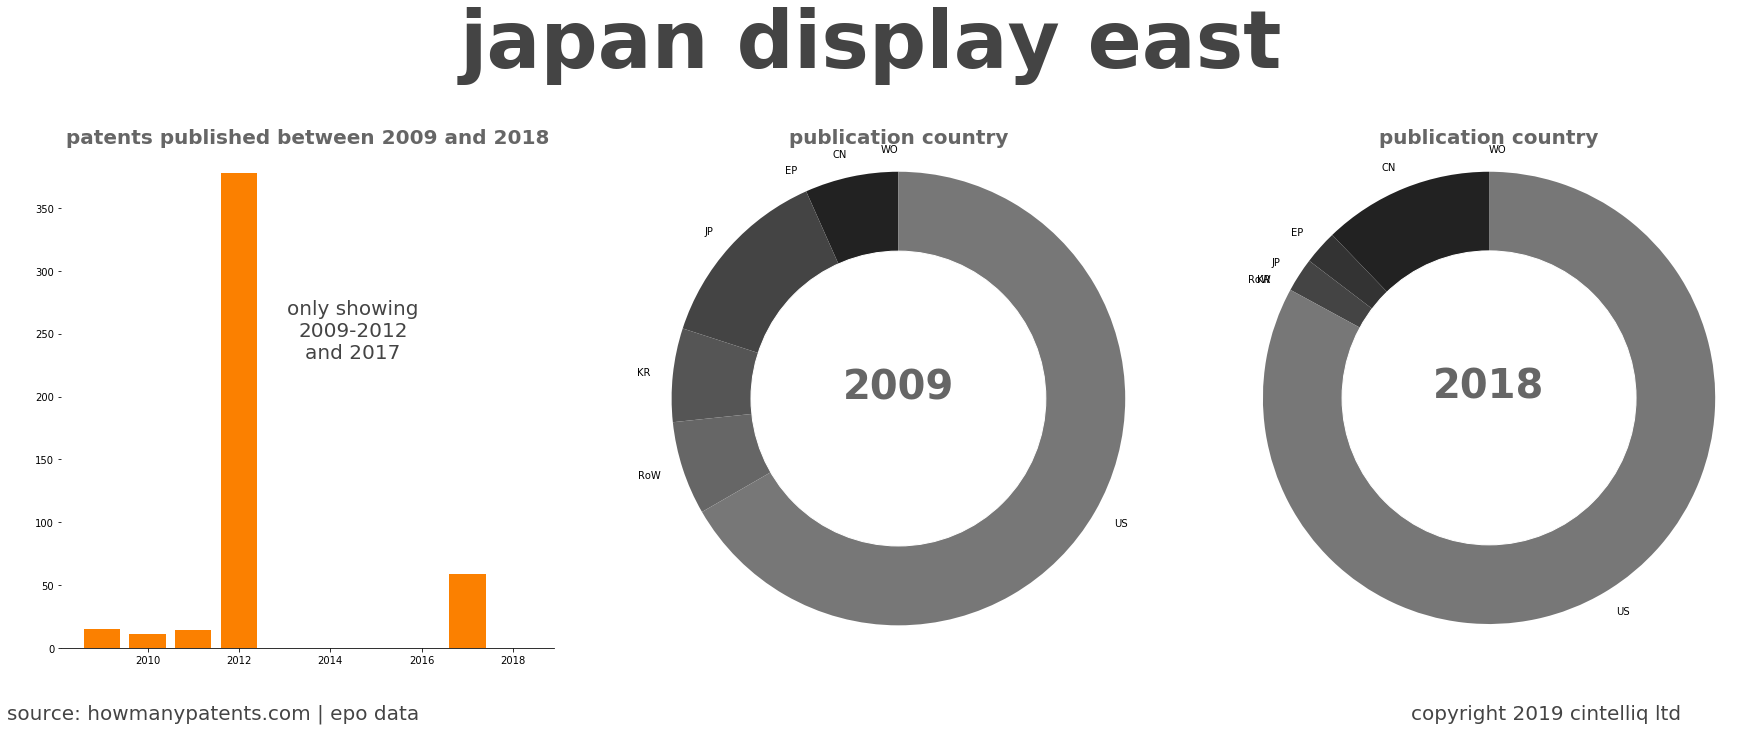 summary of patents for Japan Display East